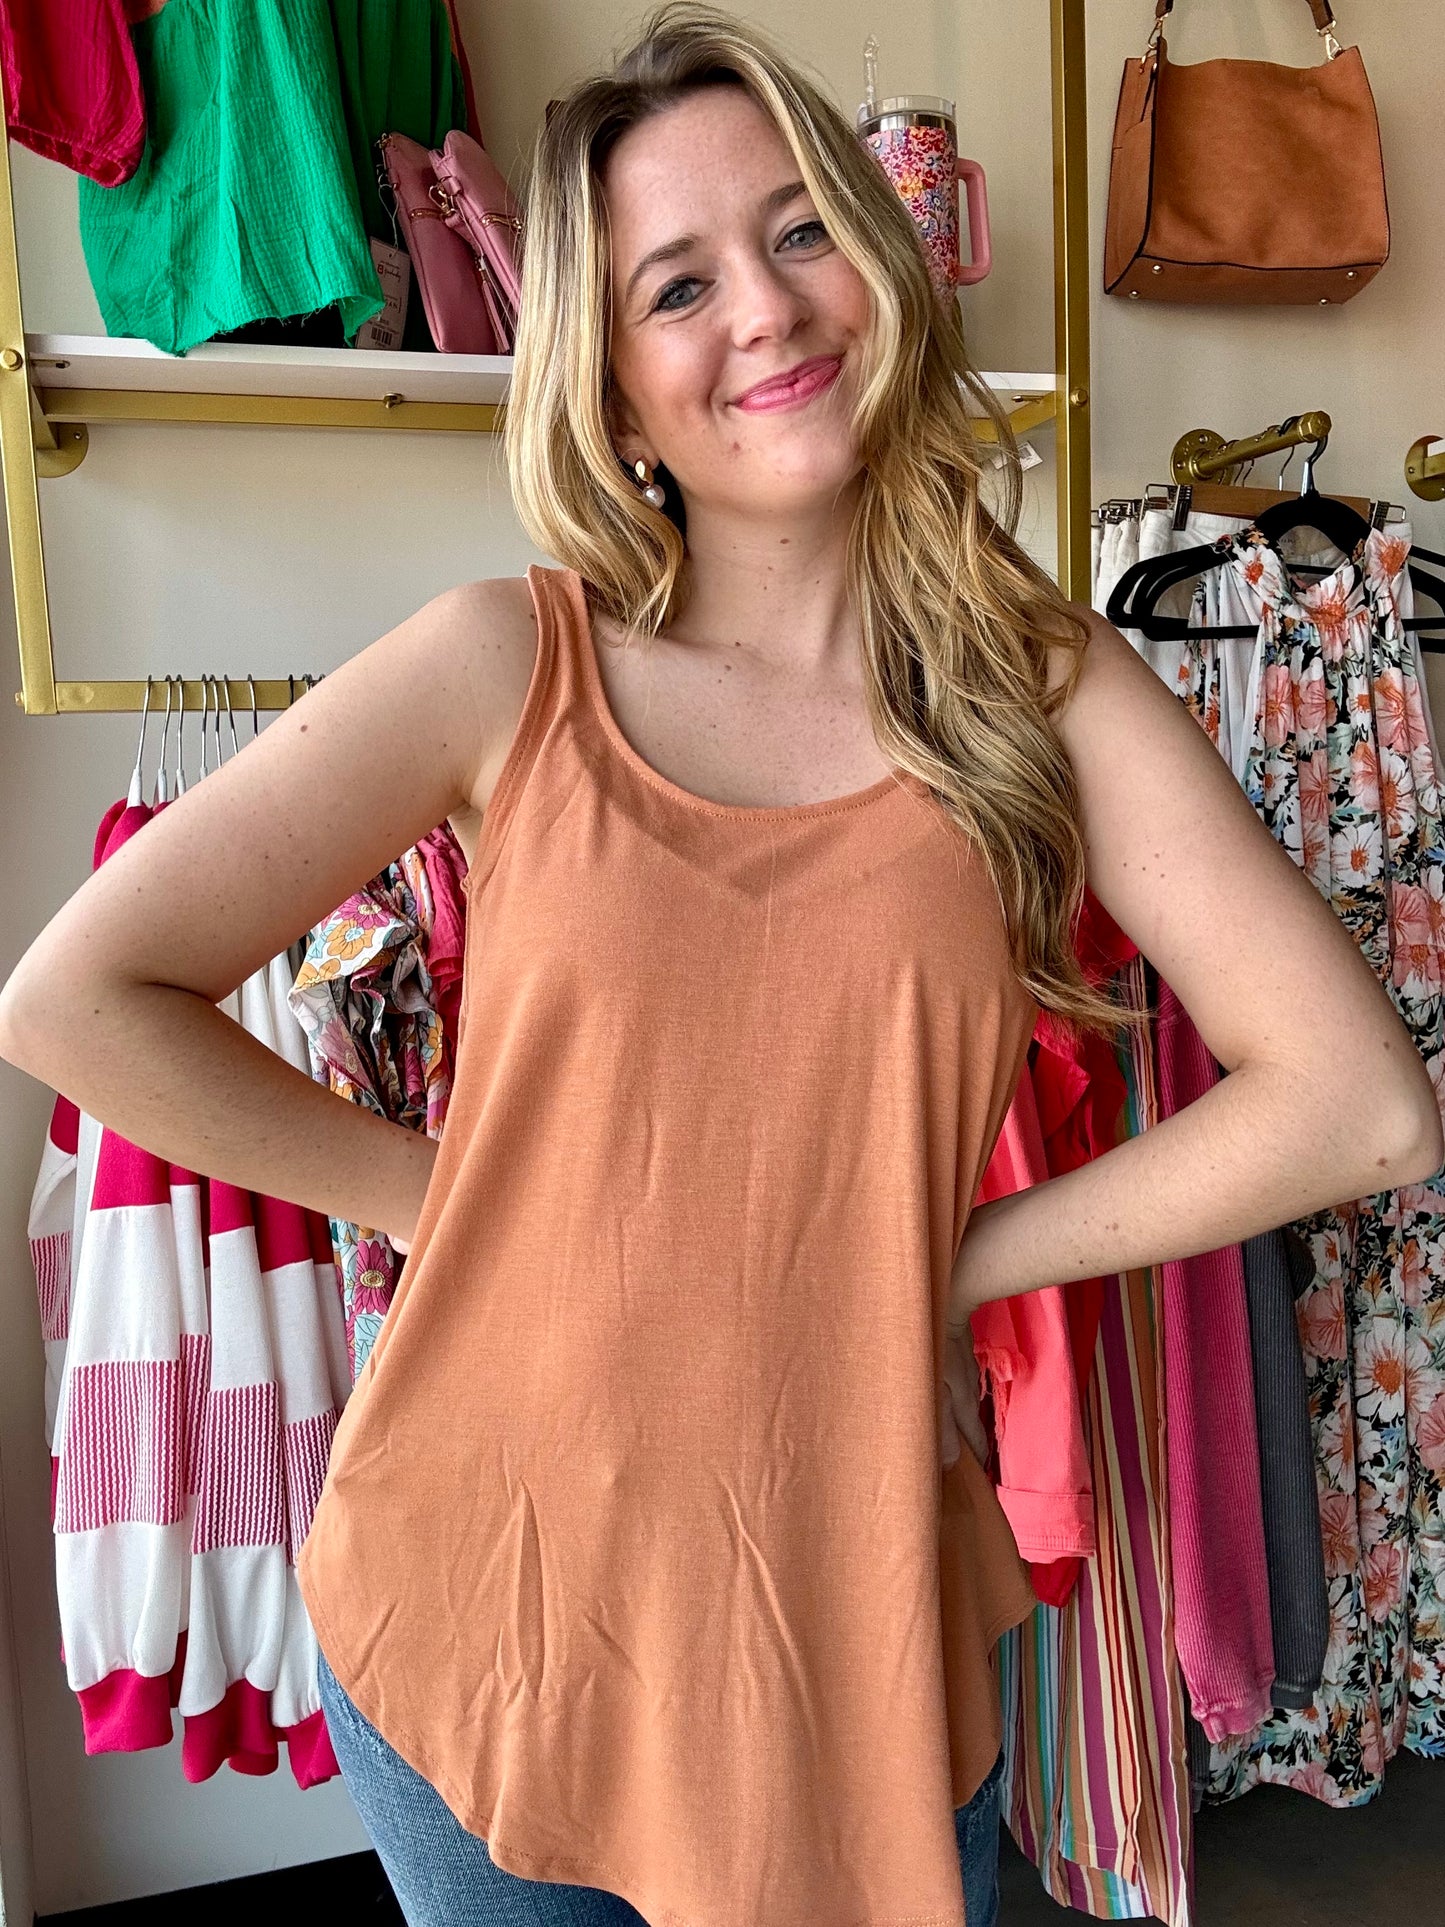 This Rounded Neck Tank is more than just your average top. With its relaxed fit and round hem, it's the perfect tank for any occasion. Made with the best quality, this top will be your go-to piece in your wardrobe.